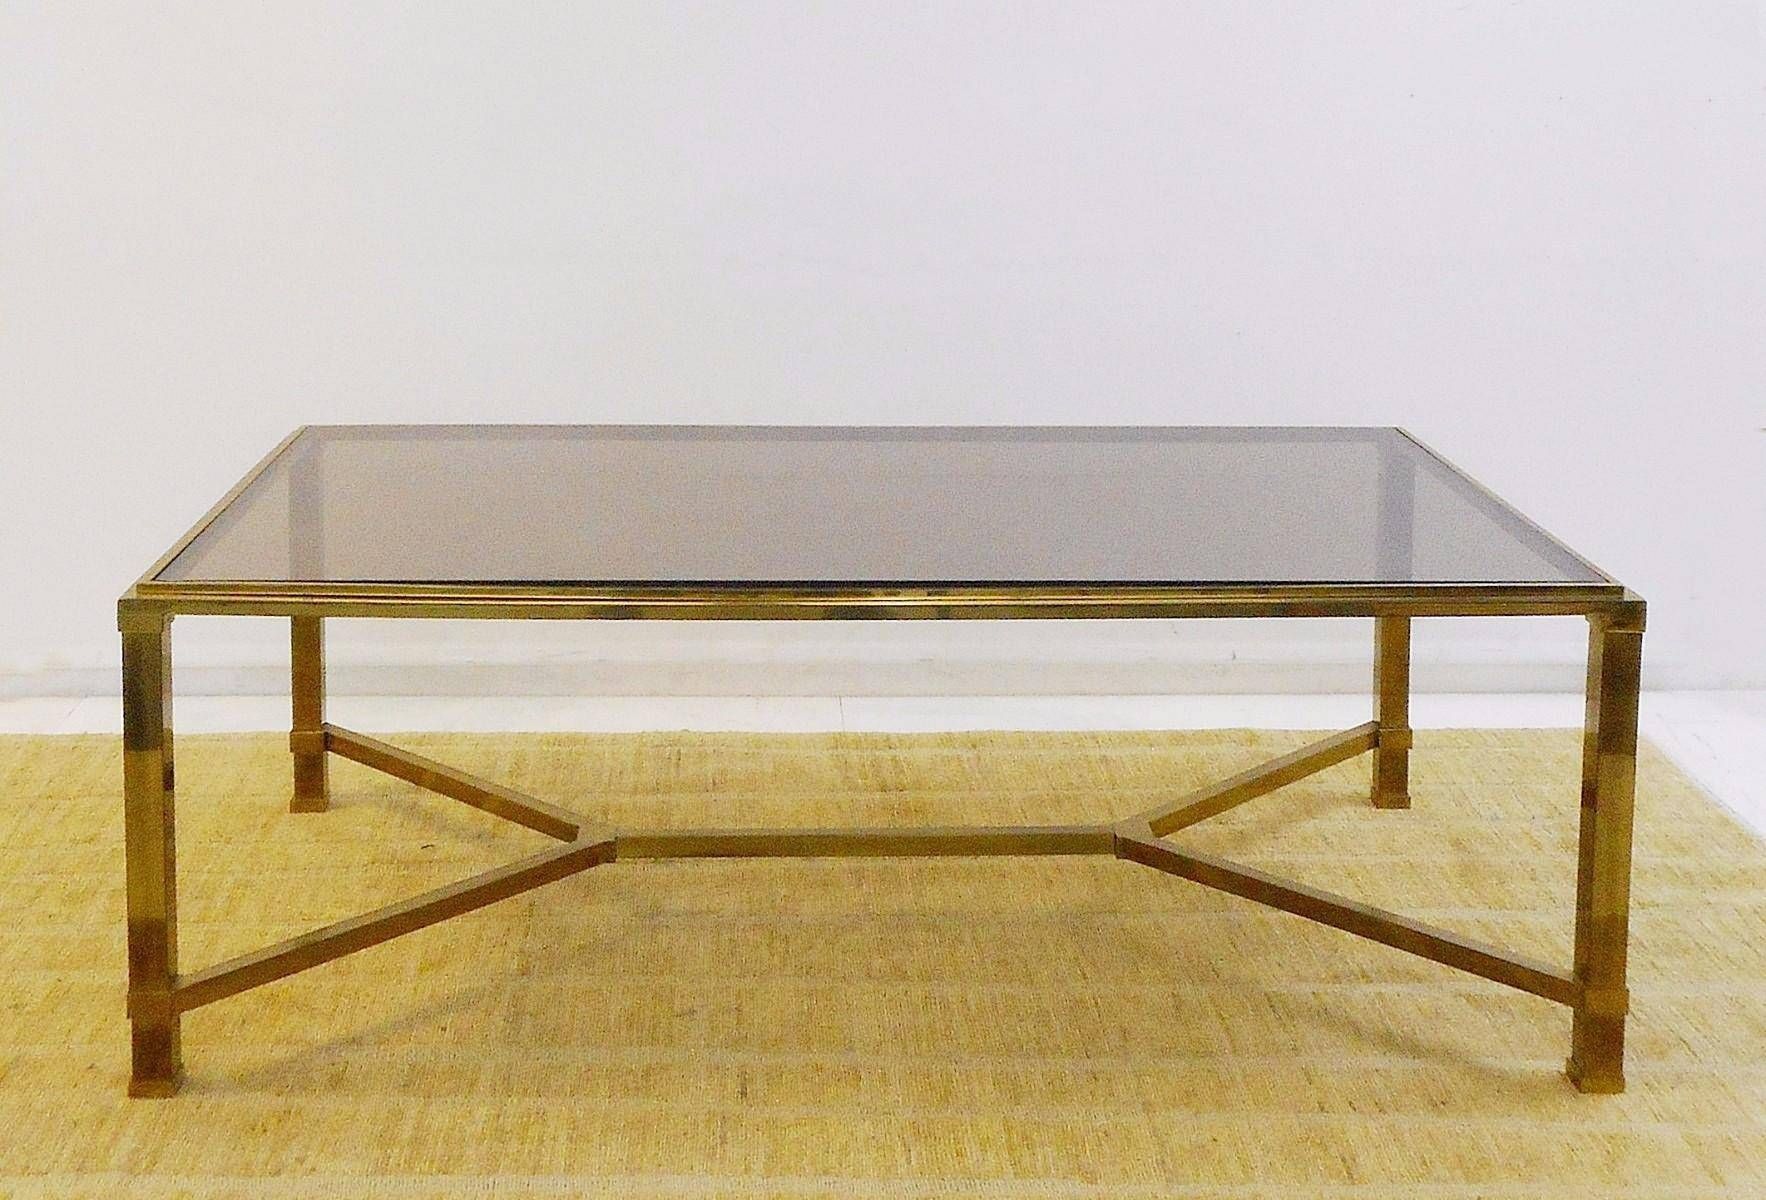 Vintage Brass & Smoked Glass Coffee Table For Sale At Pamono Intended For Retro Smoked Glass Coffee Tables (View 18 of 30)